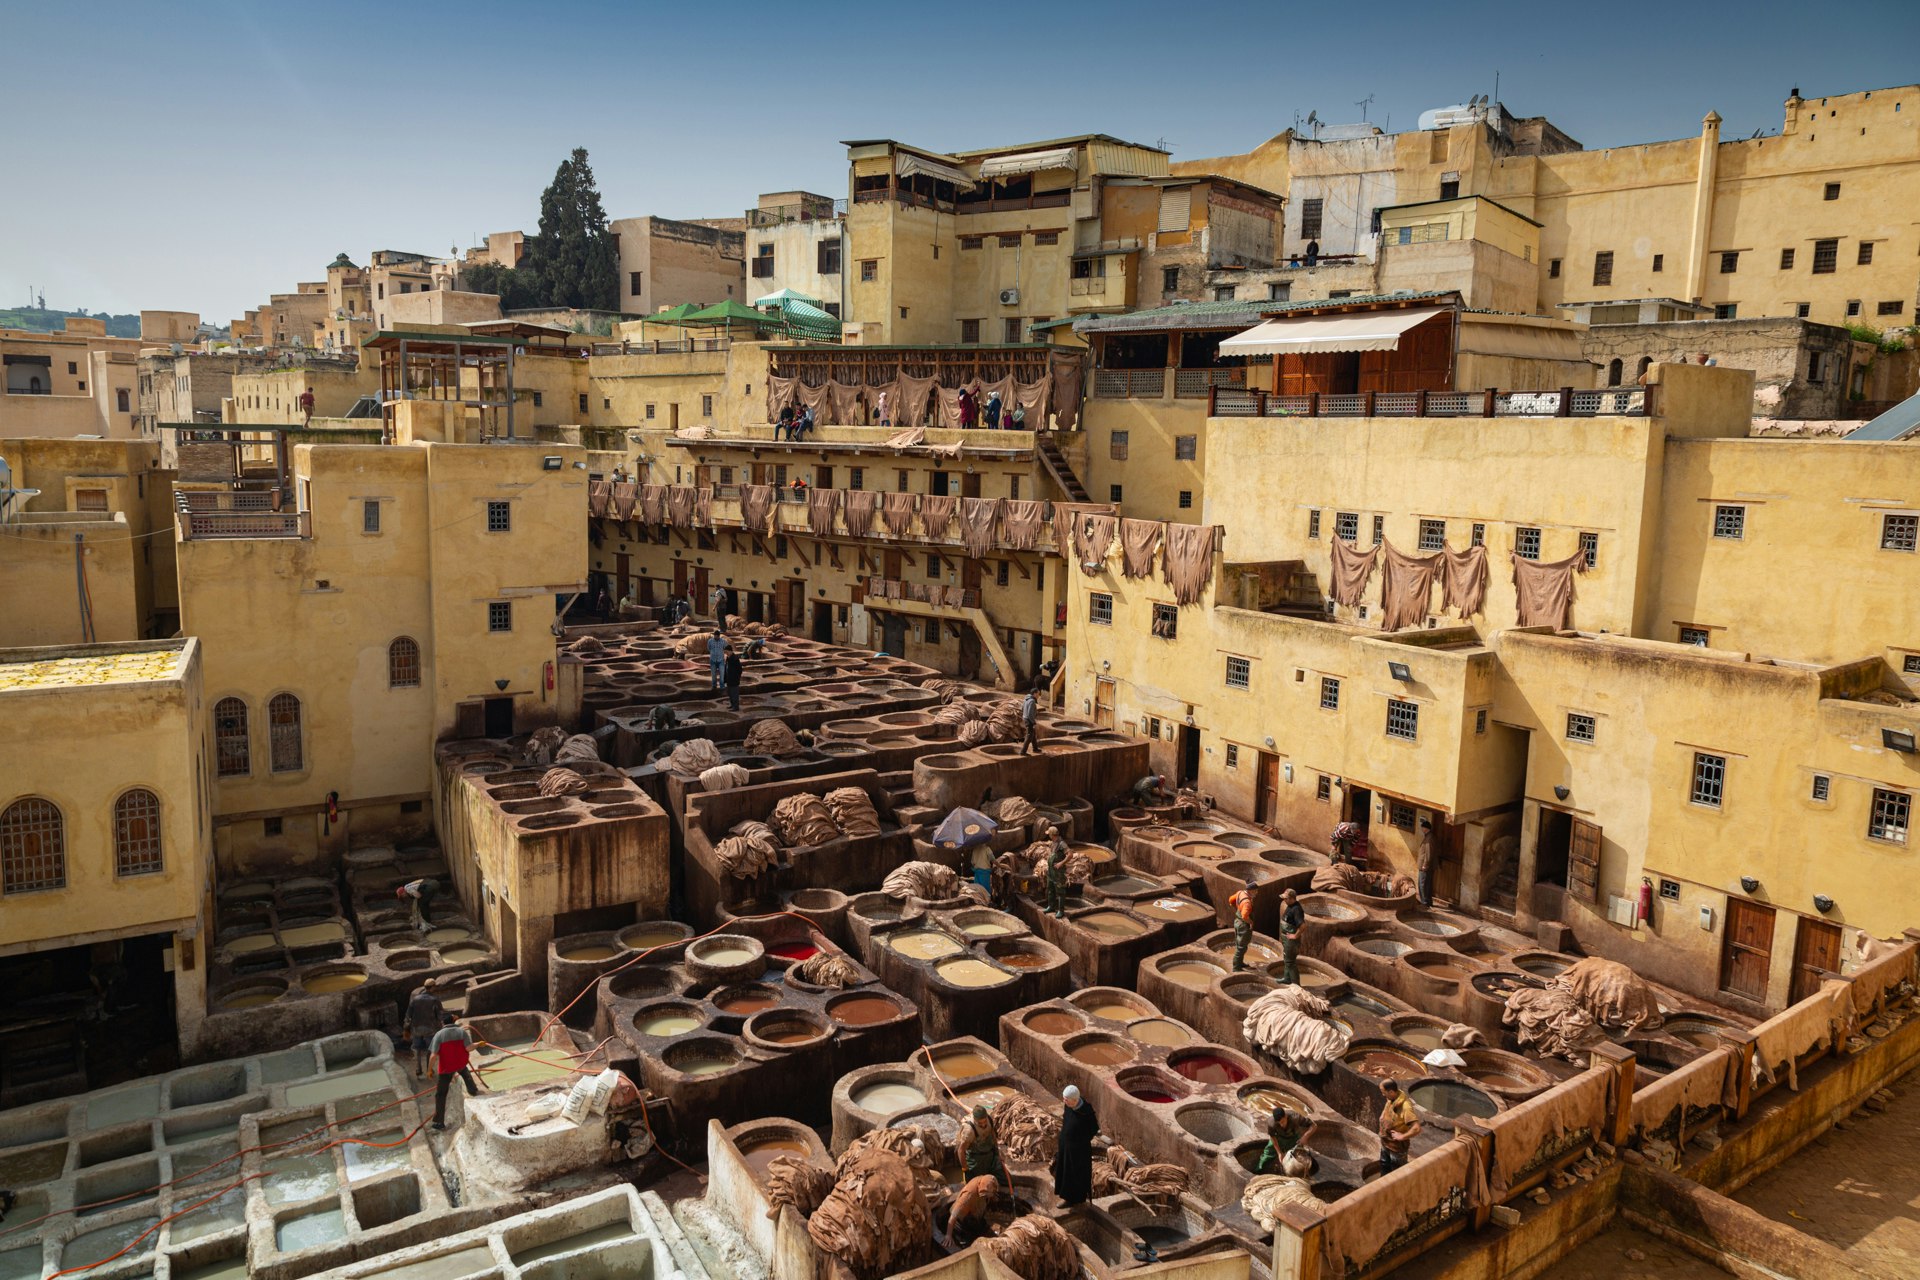 An outdoor tannery in Fez, with large stone vessels filled with dyes